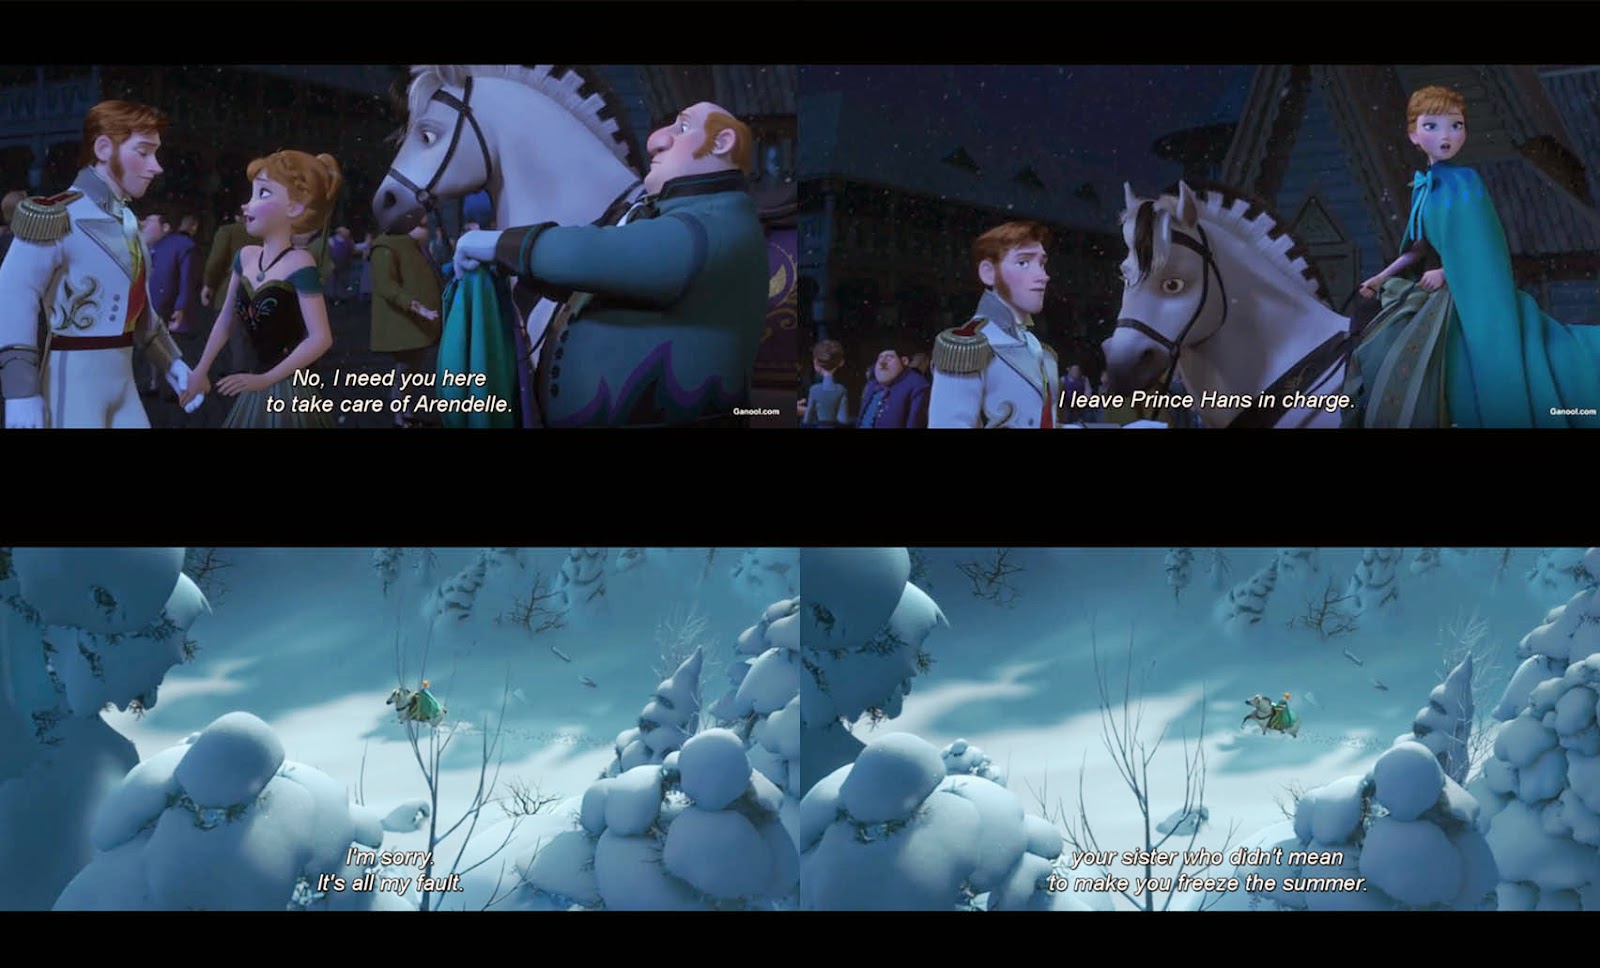 Gender Stereotypes and Performativity in Frozen Movie